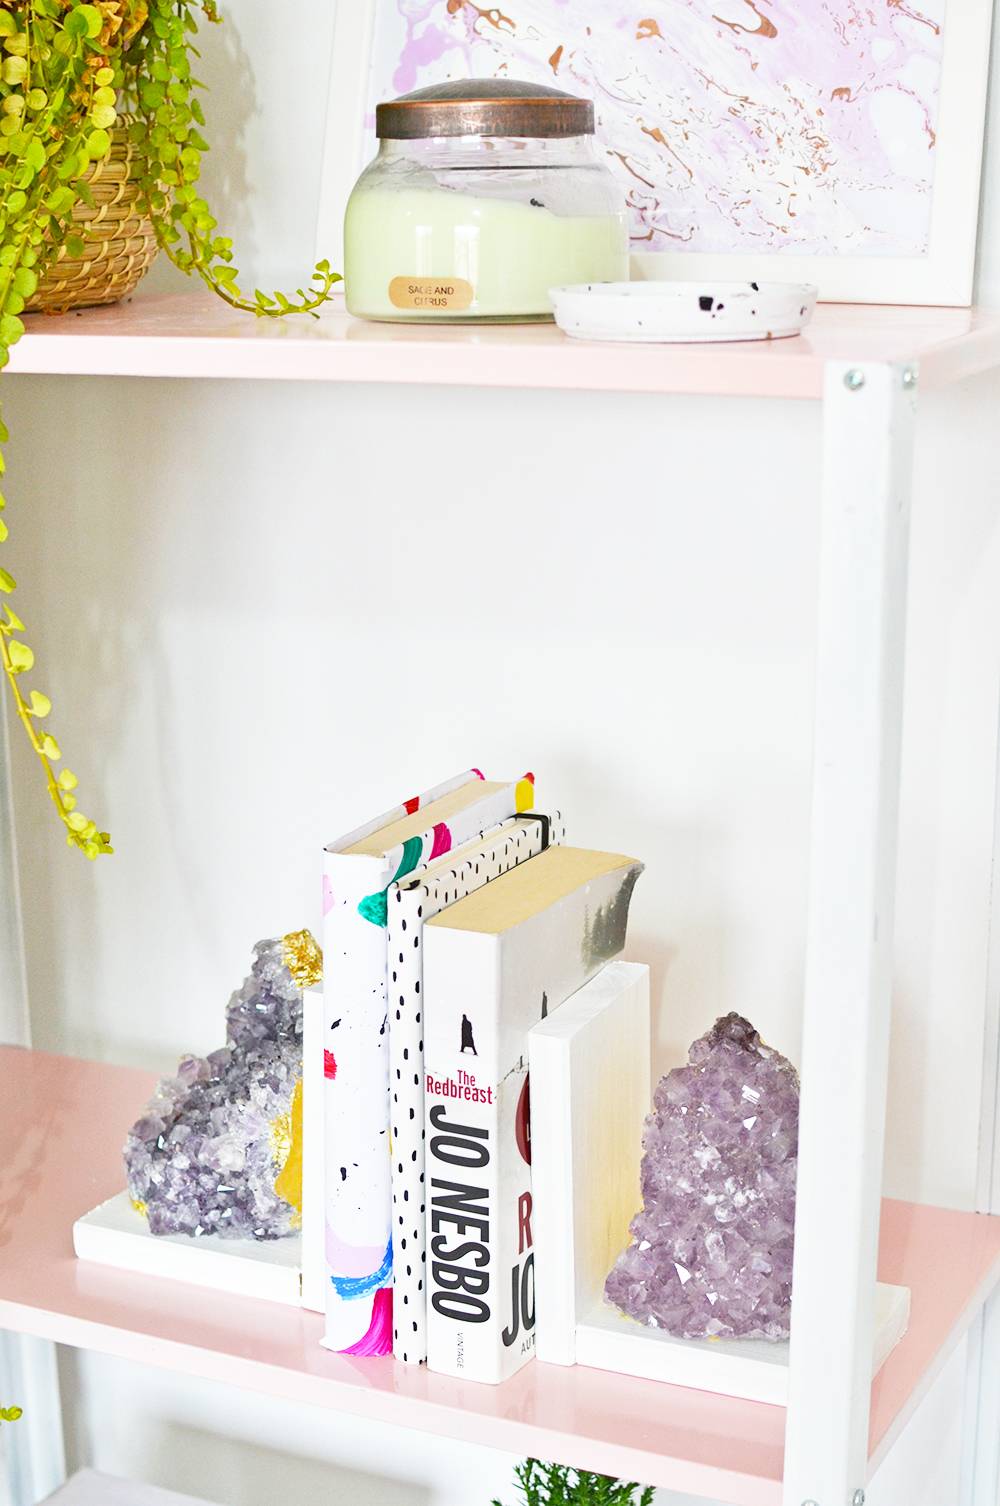 Now take a coffee break and pat yourself for doing such a great job. Find your favorite decor book, magazine or even your journal and stack them in between your two gorgeous amethyst bookends that you made for less than $60 when it could have cost you $150+